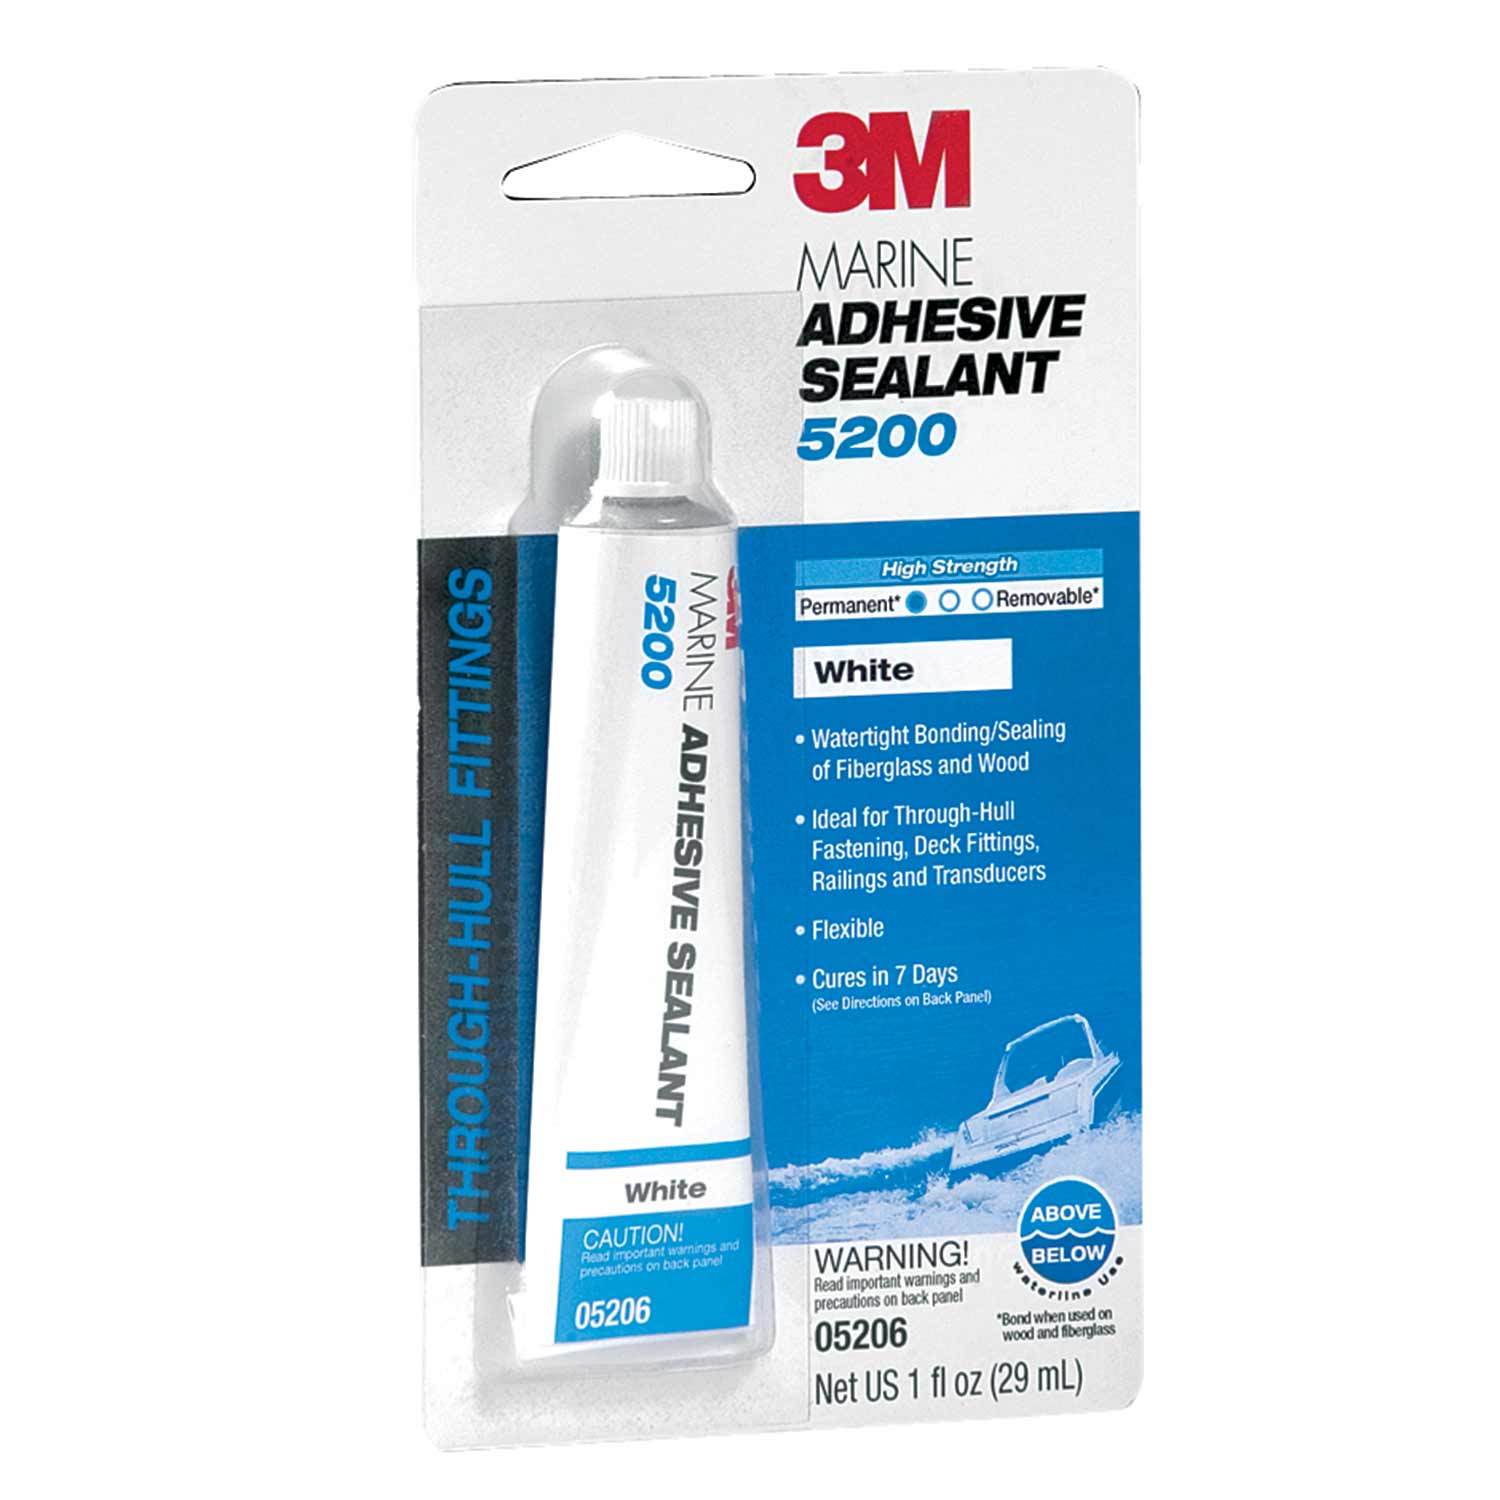 303 AeroSpace Protectant Reviews - 3M, Buyers' Guide